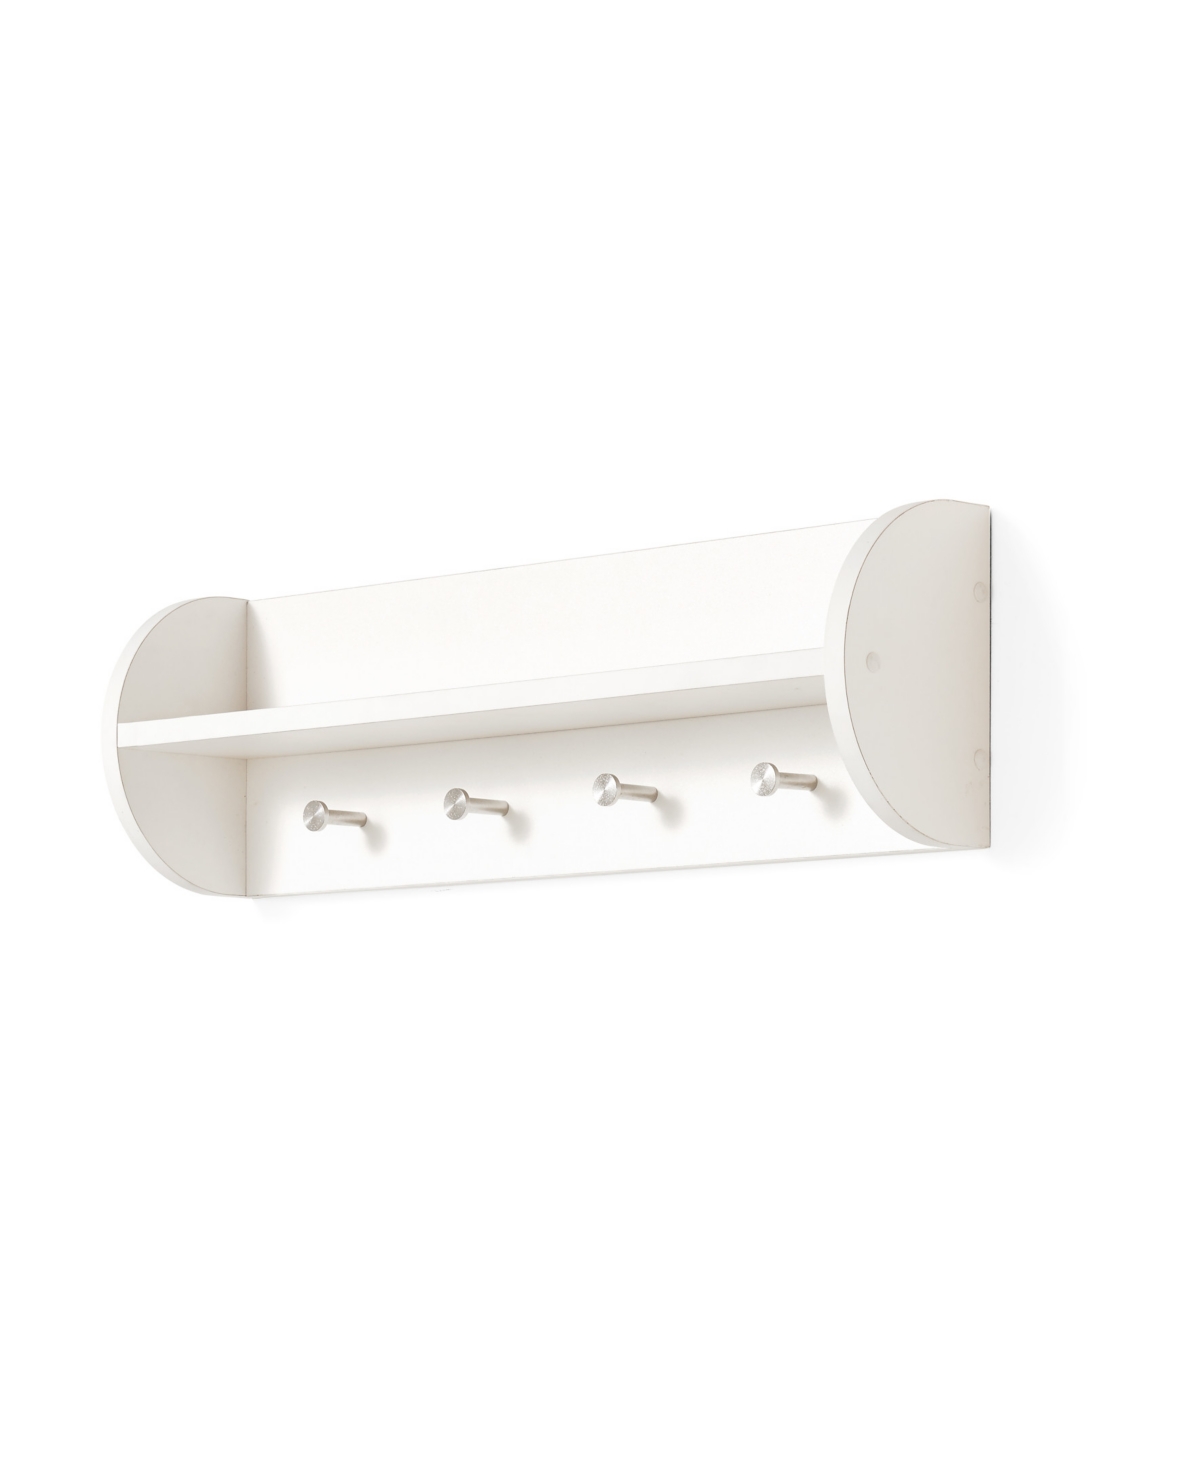 Danya B. Utility Shelf with Four Large Stainless Steel Hooks - White